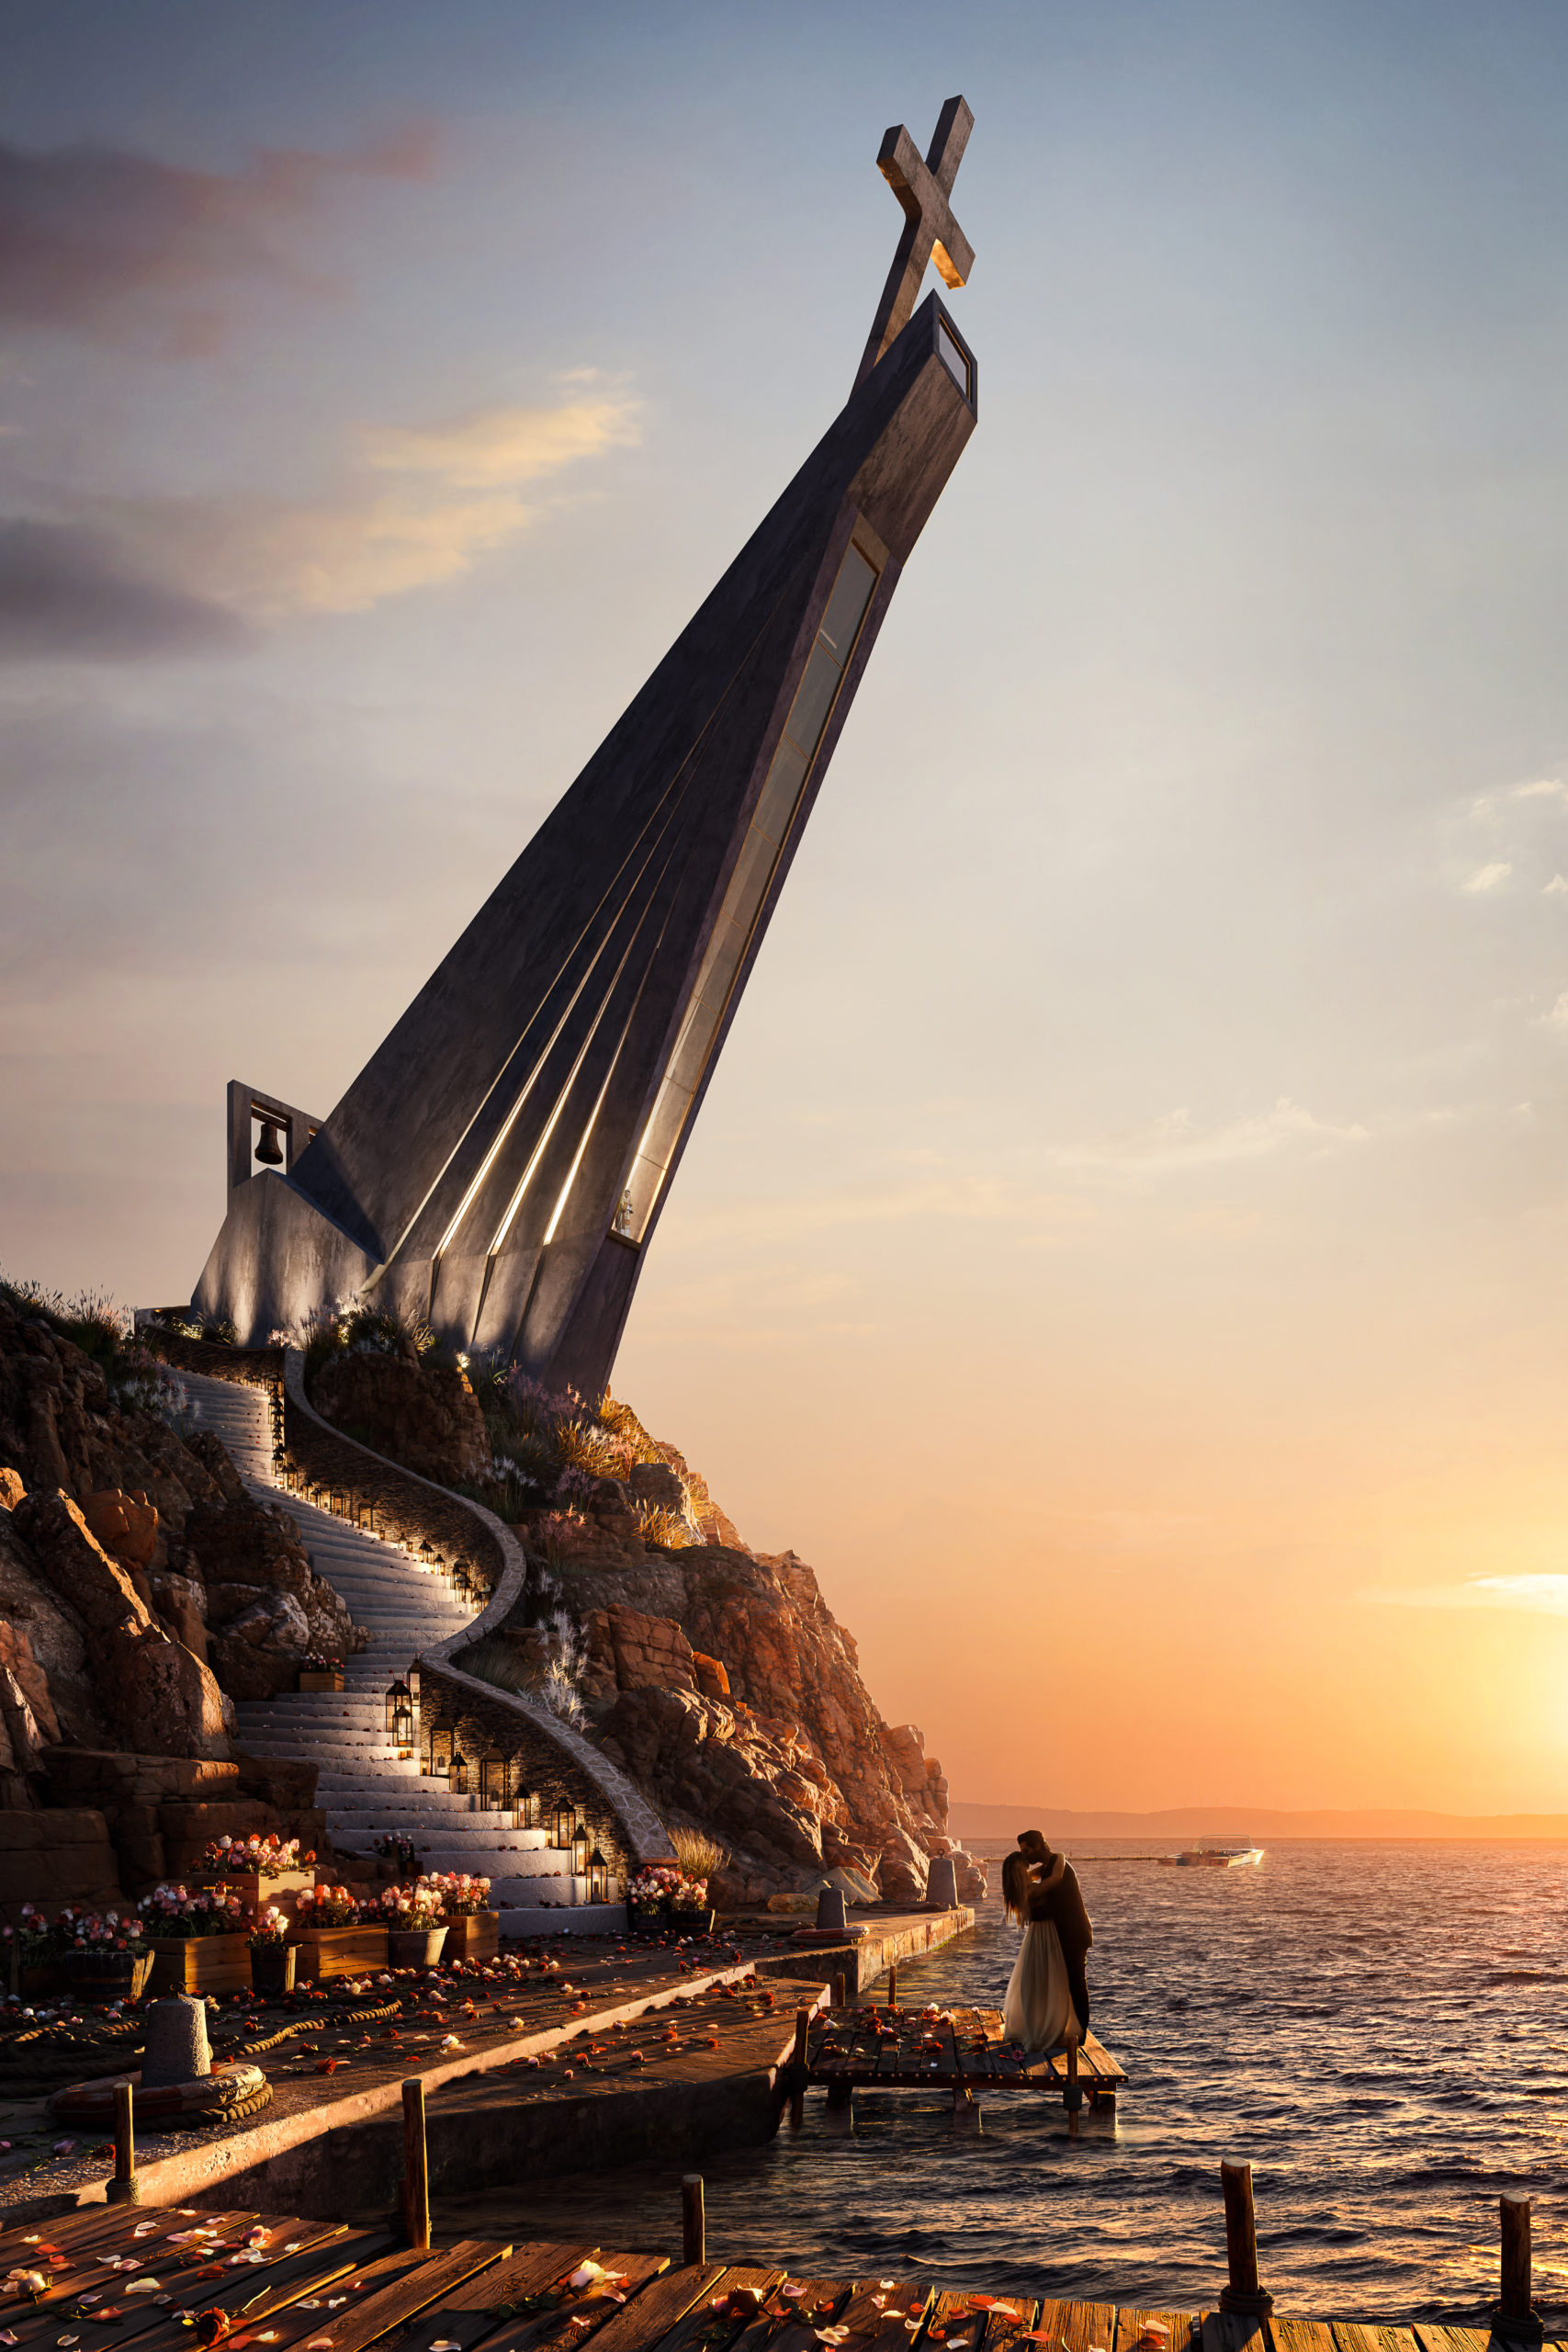 100 Renderings That Tell Stories About Architecture and Our World in 2022